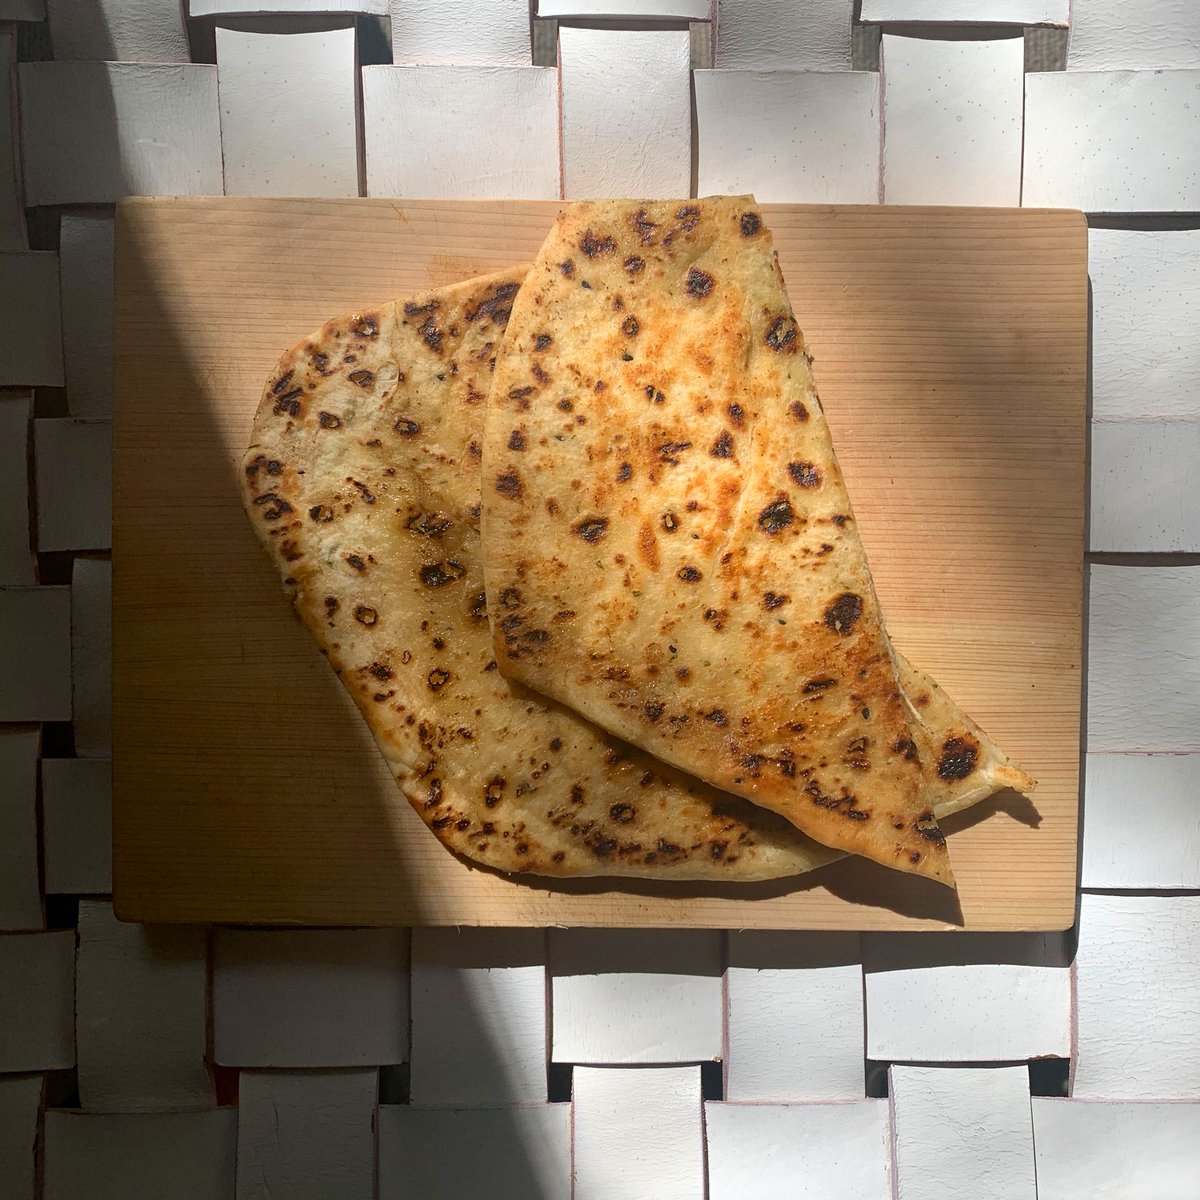 i did an absolute shitload of cooking today and consequently did not feel like eating! it’s 9.06pm here is some plain naan that i ate just now. tomorrow i will have more nutrients